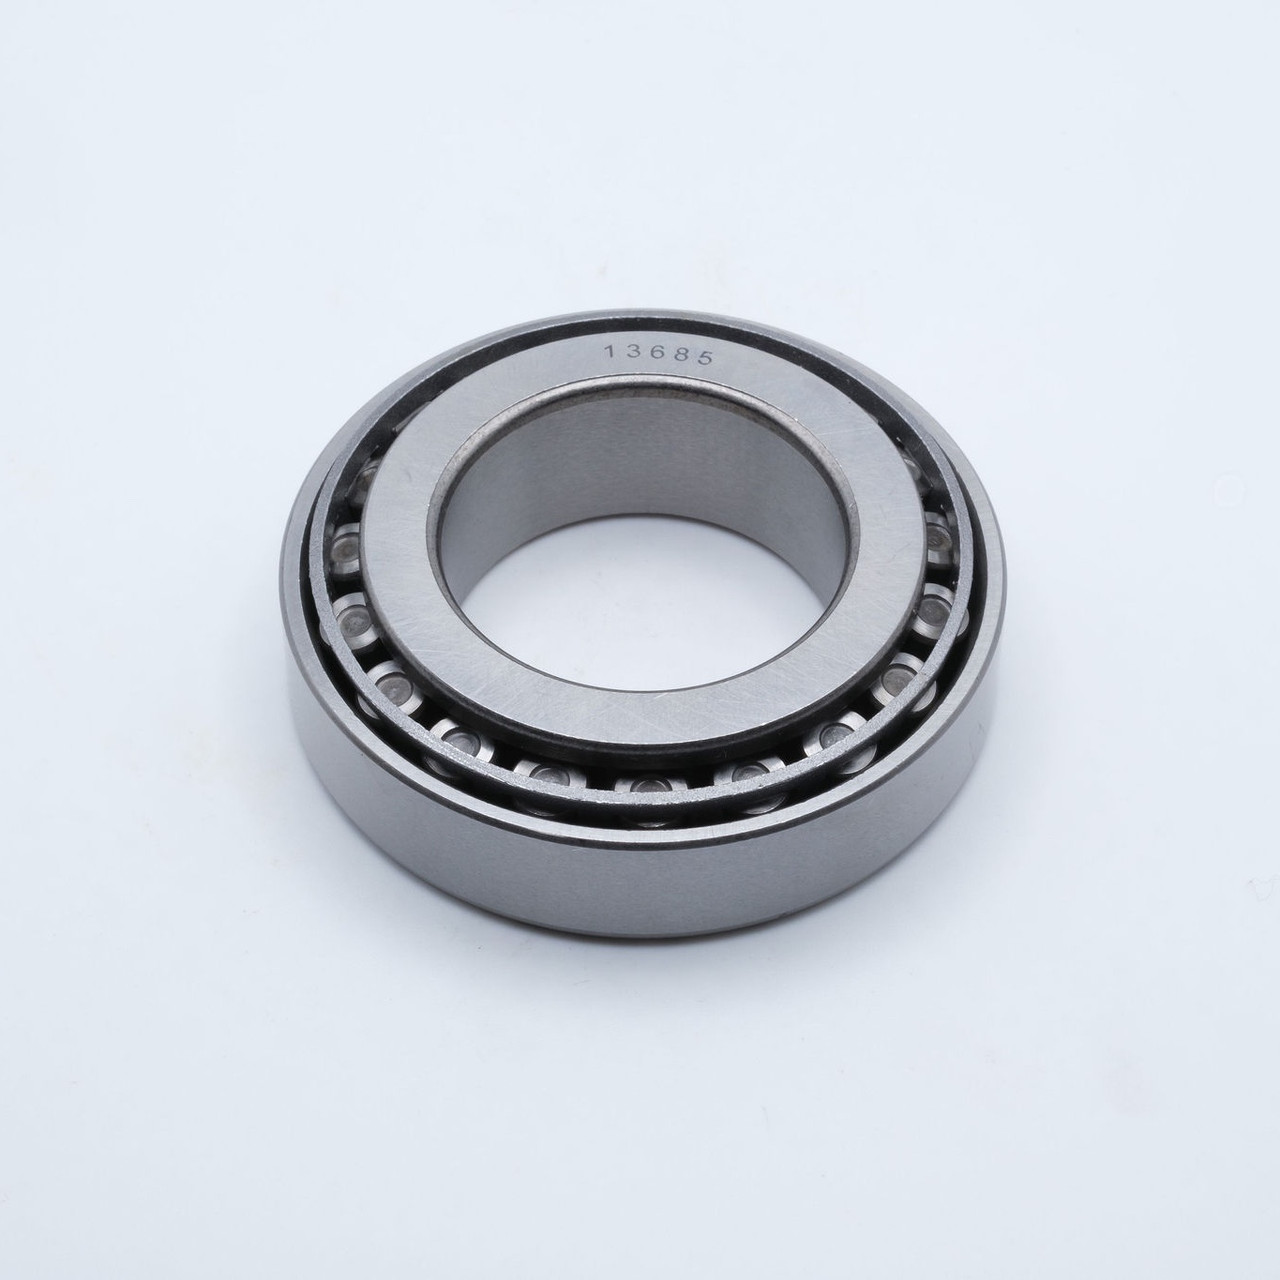 33208 Tapered Roller Bearing 35x72x28 Back View